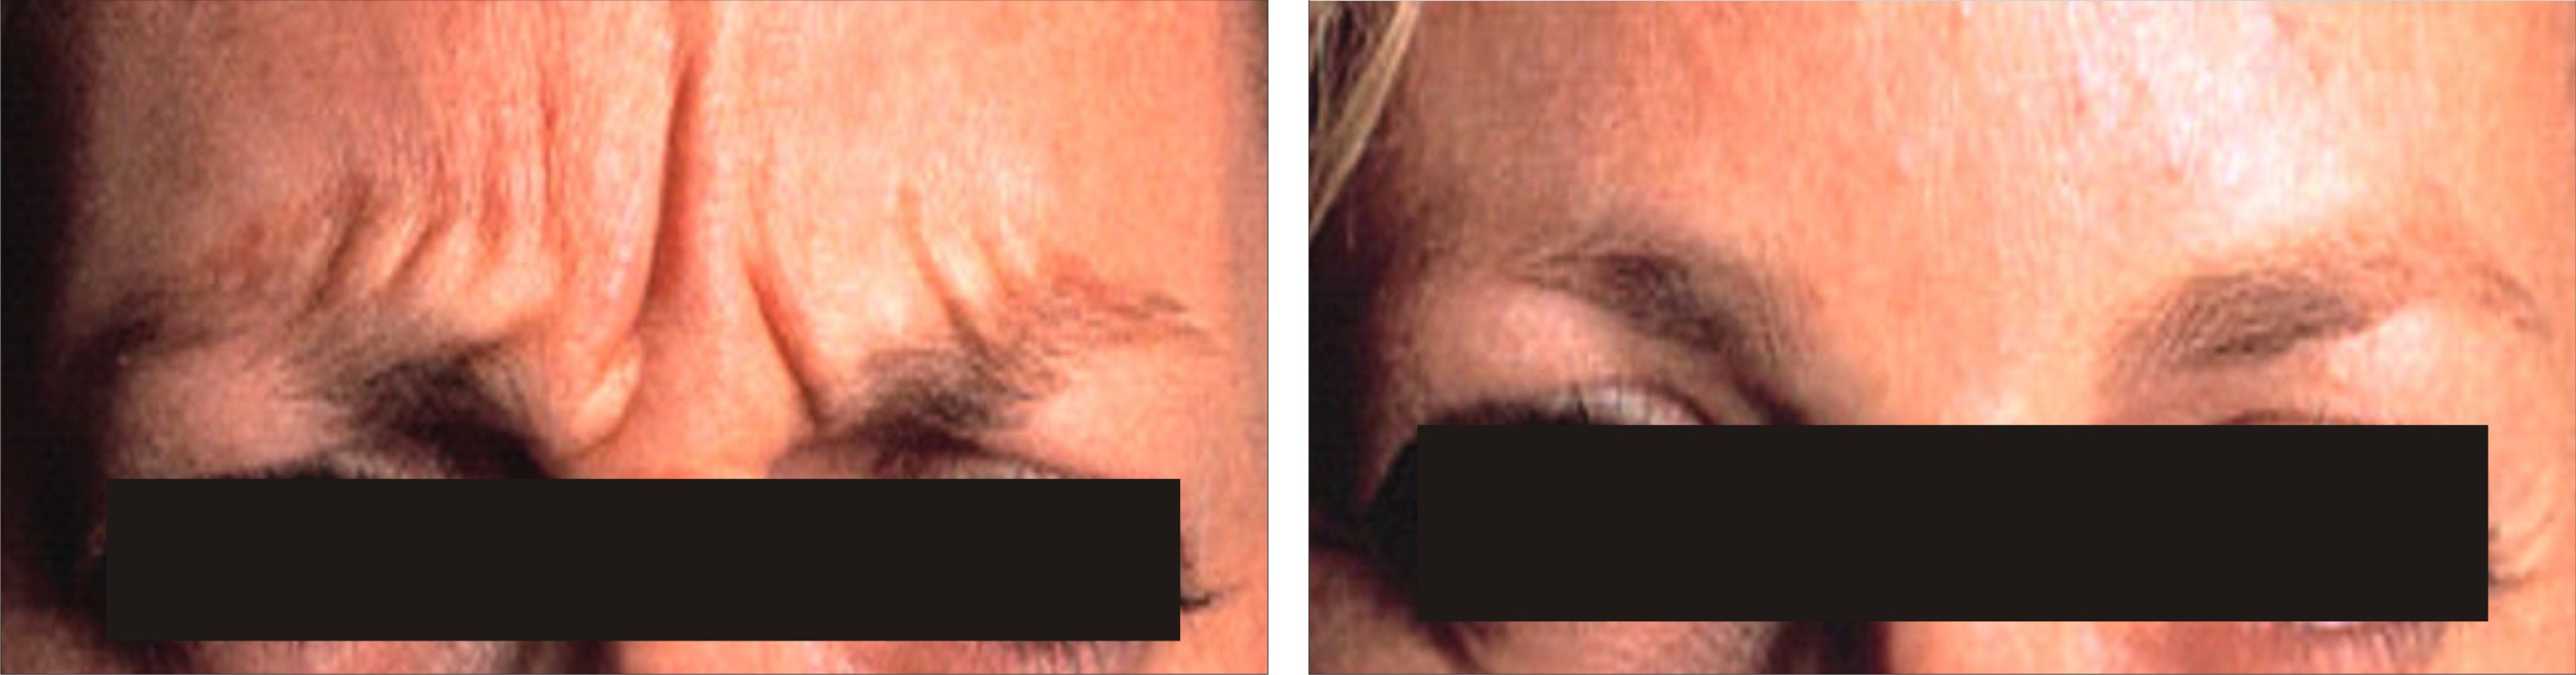 Botulinum Toxin A Image Two